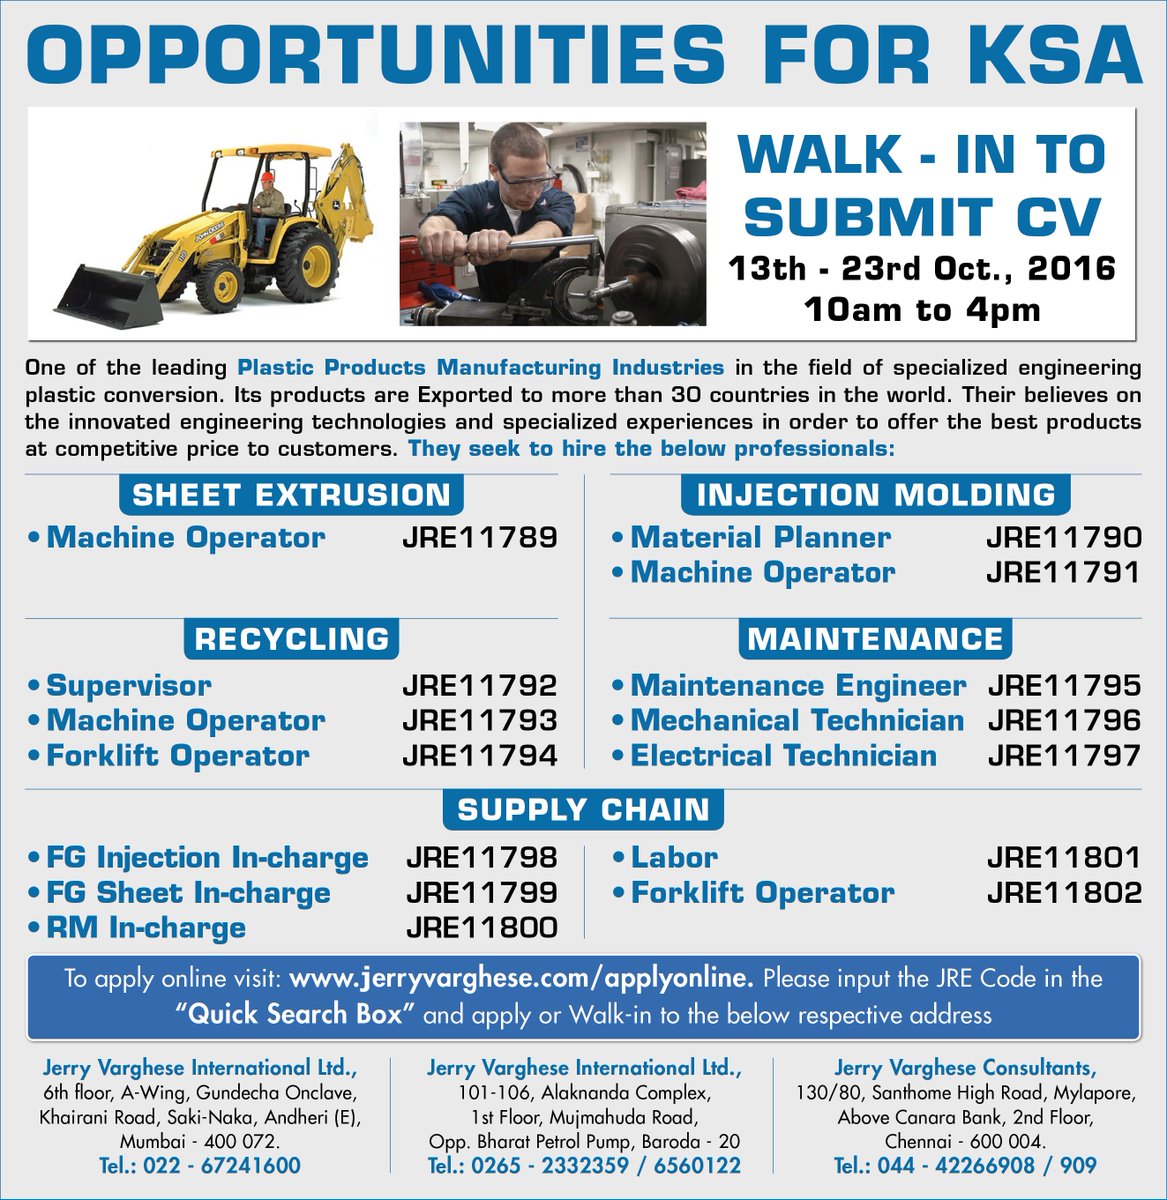 Jerry Varghese On Twitter Job Opportunities For Ksa Read Ad Image Details For Vacancy Info Apply Visit Https T Co Aqaf0aog04